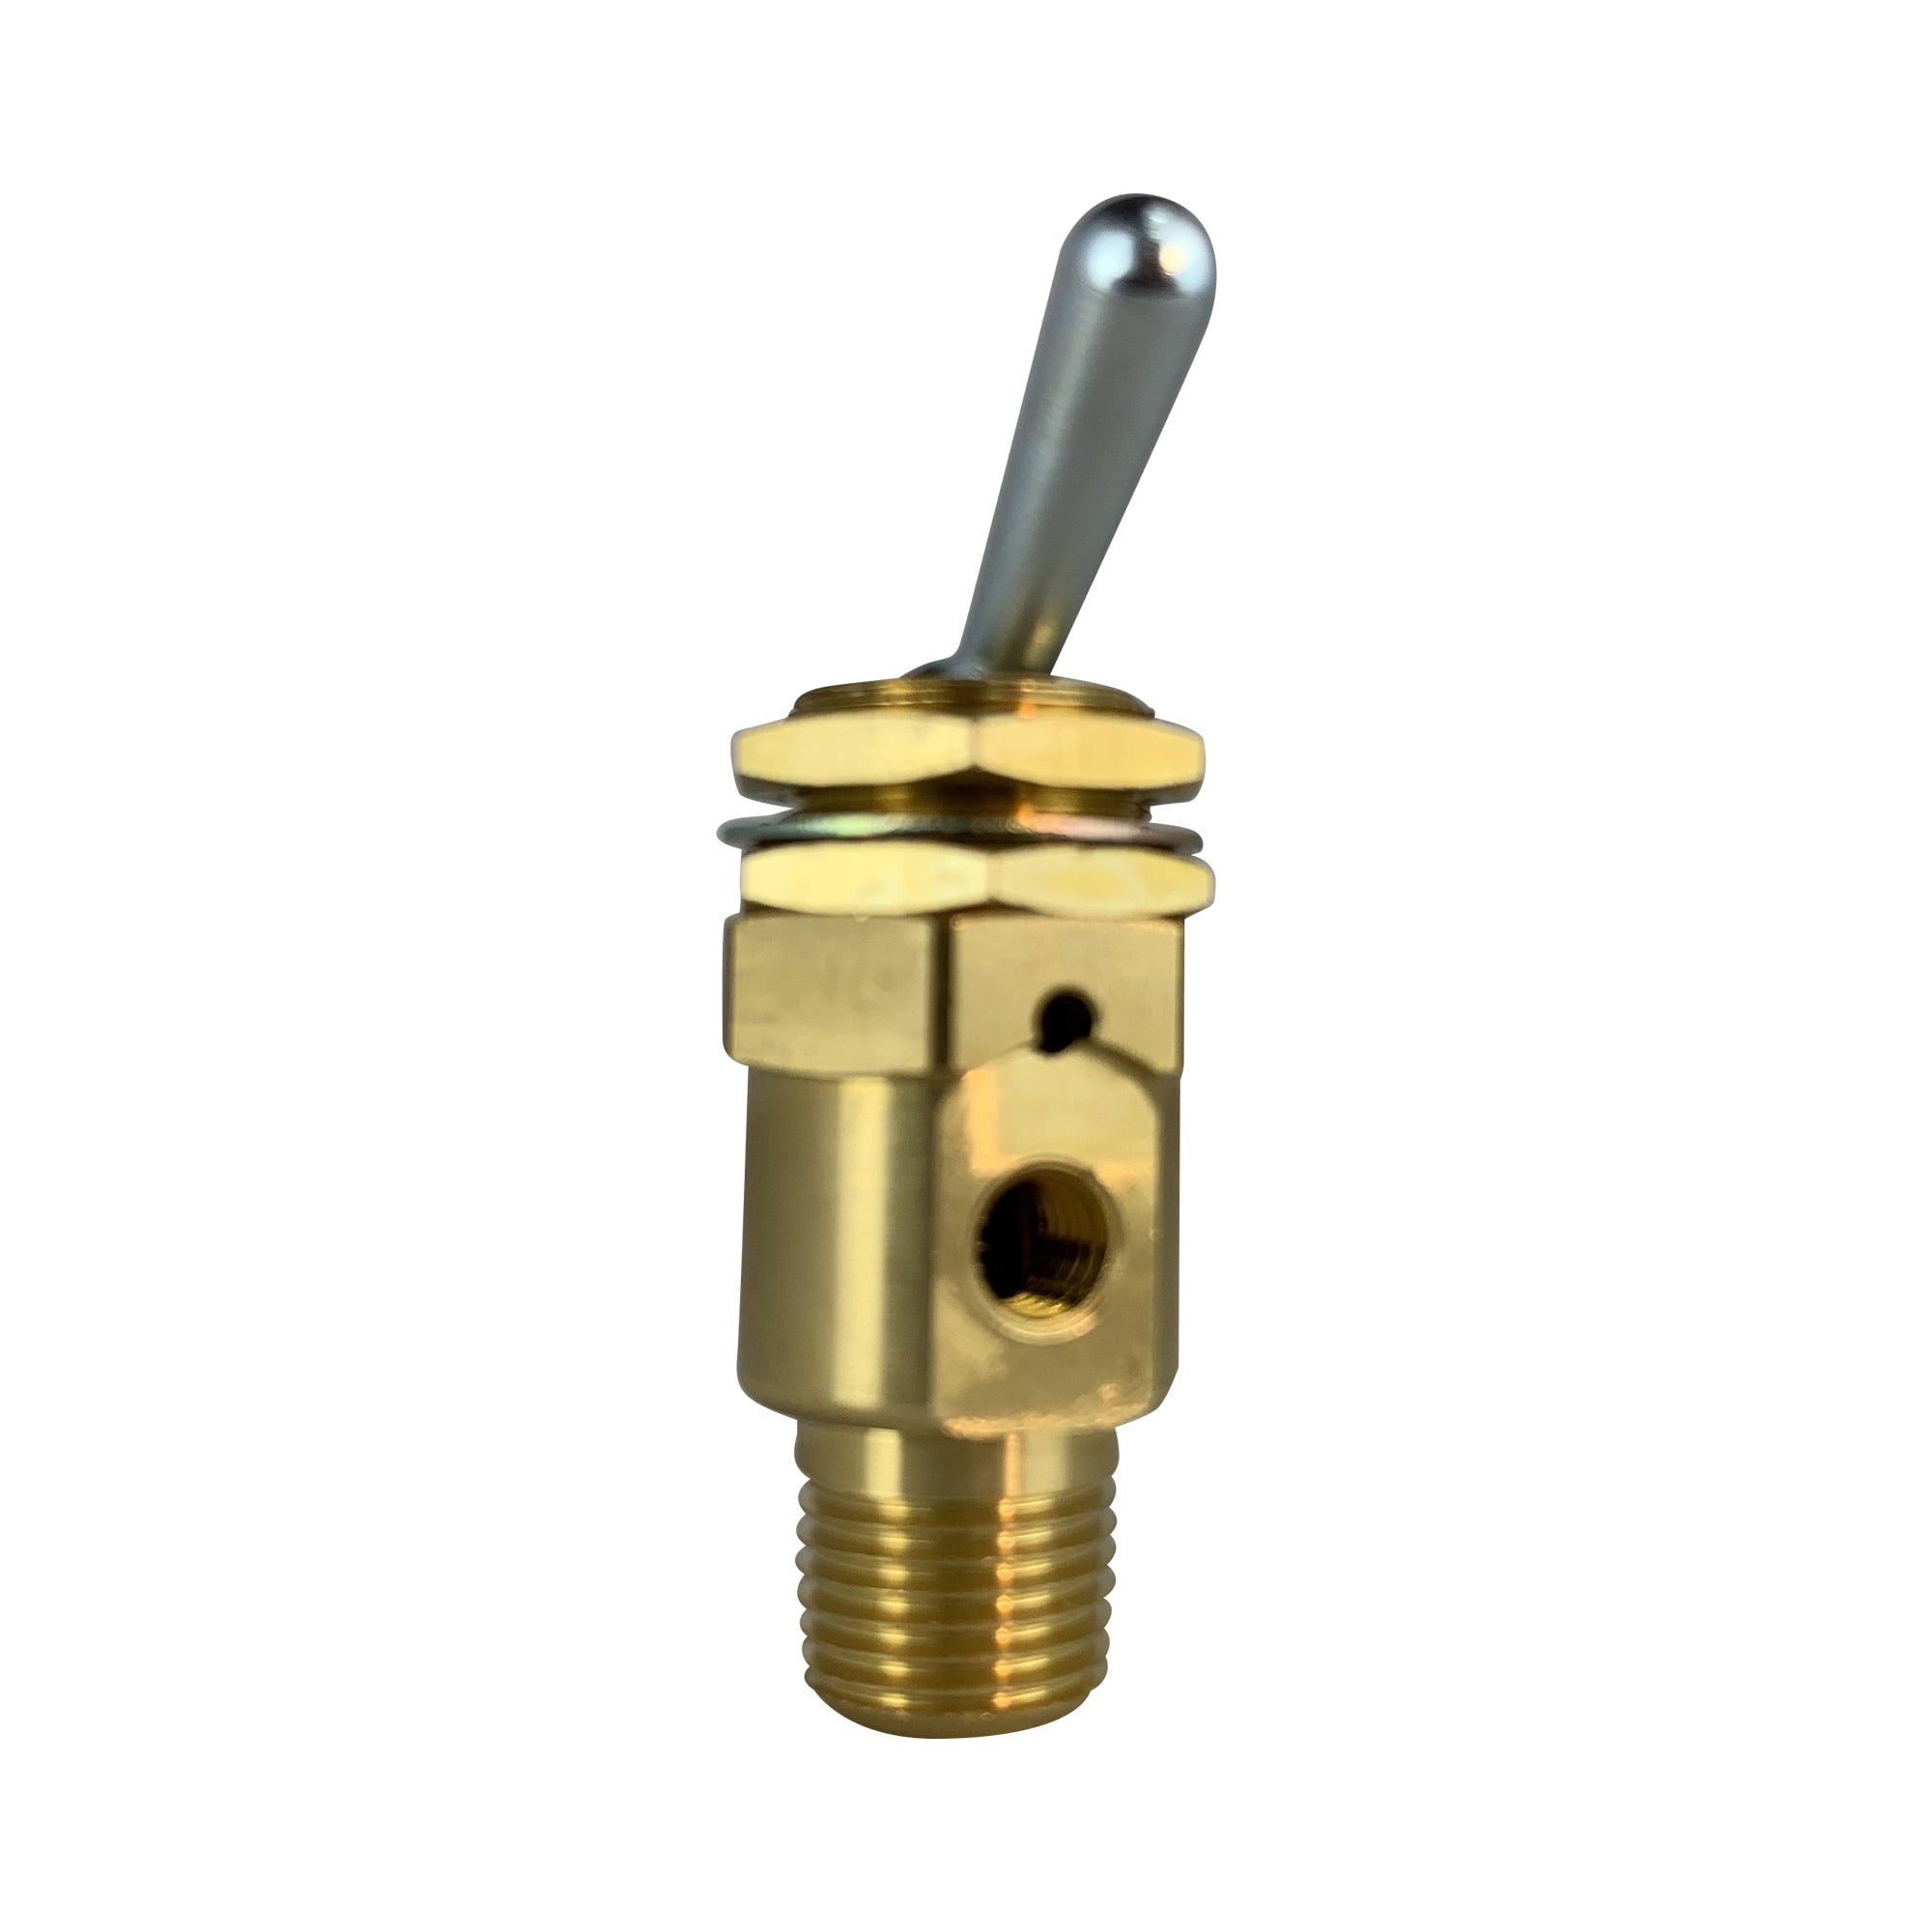 toggle switch with male thread in bottom and female threaded port on the side